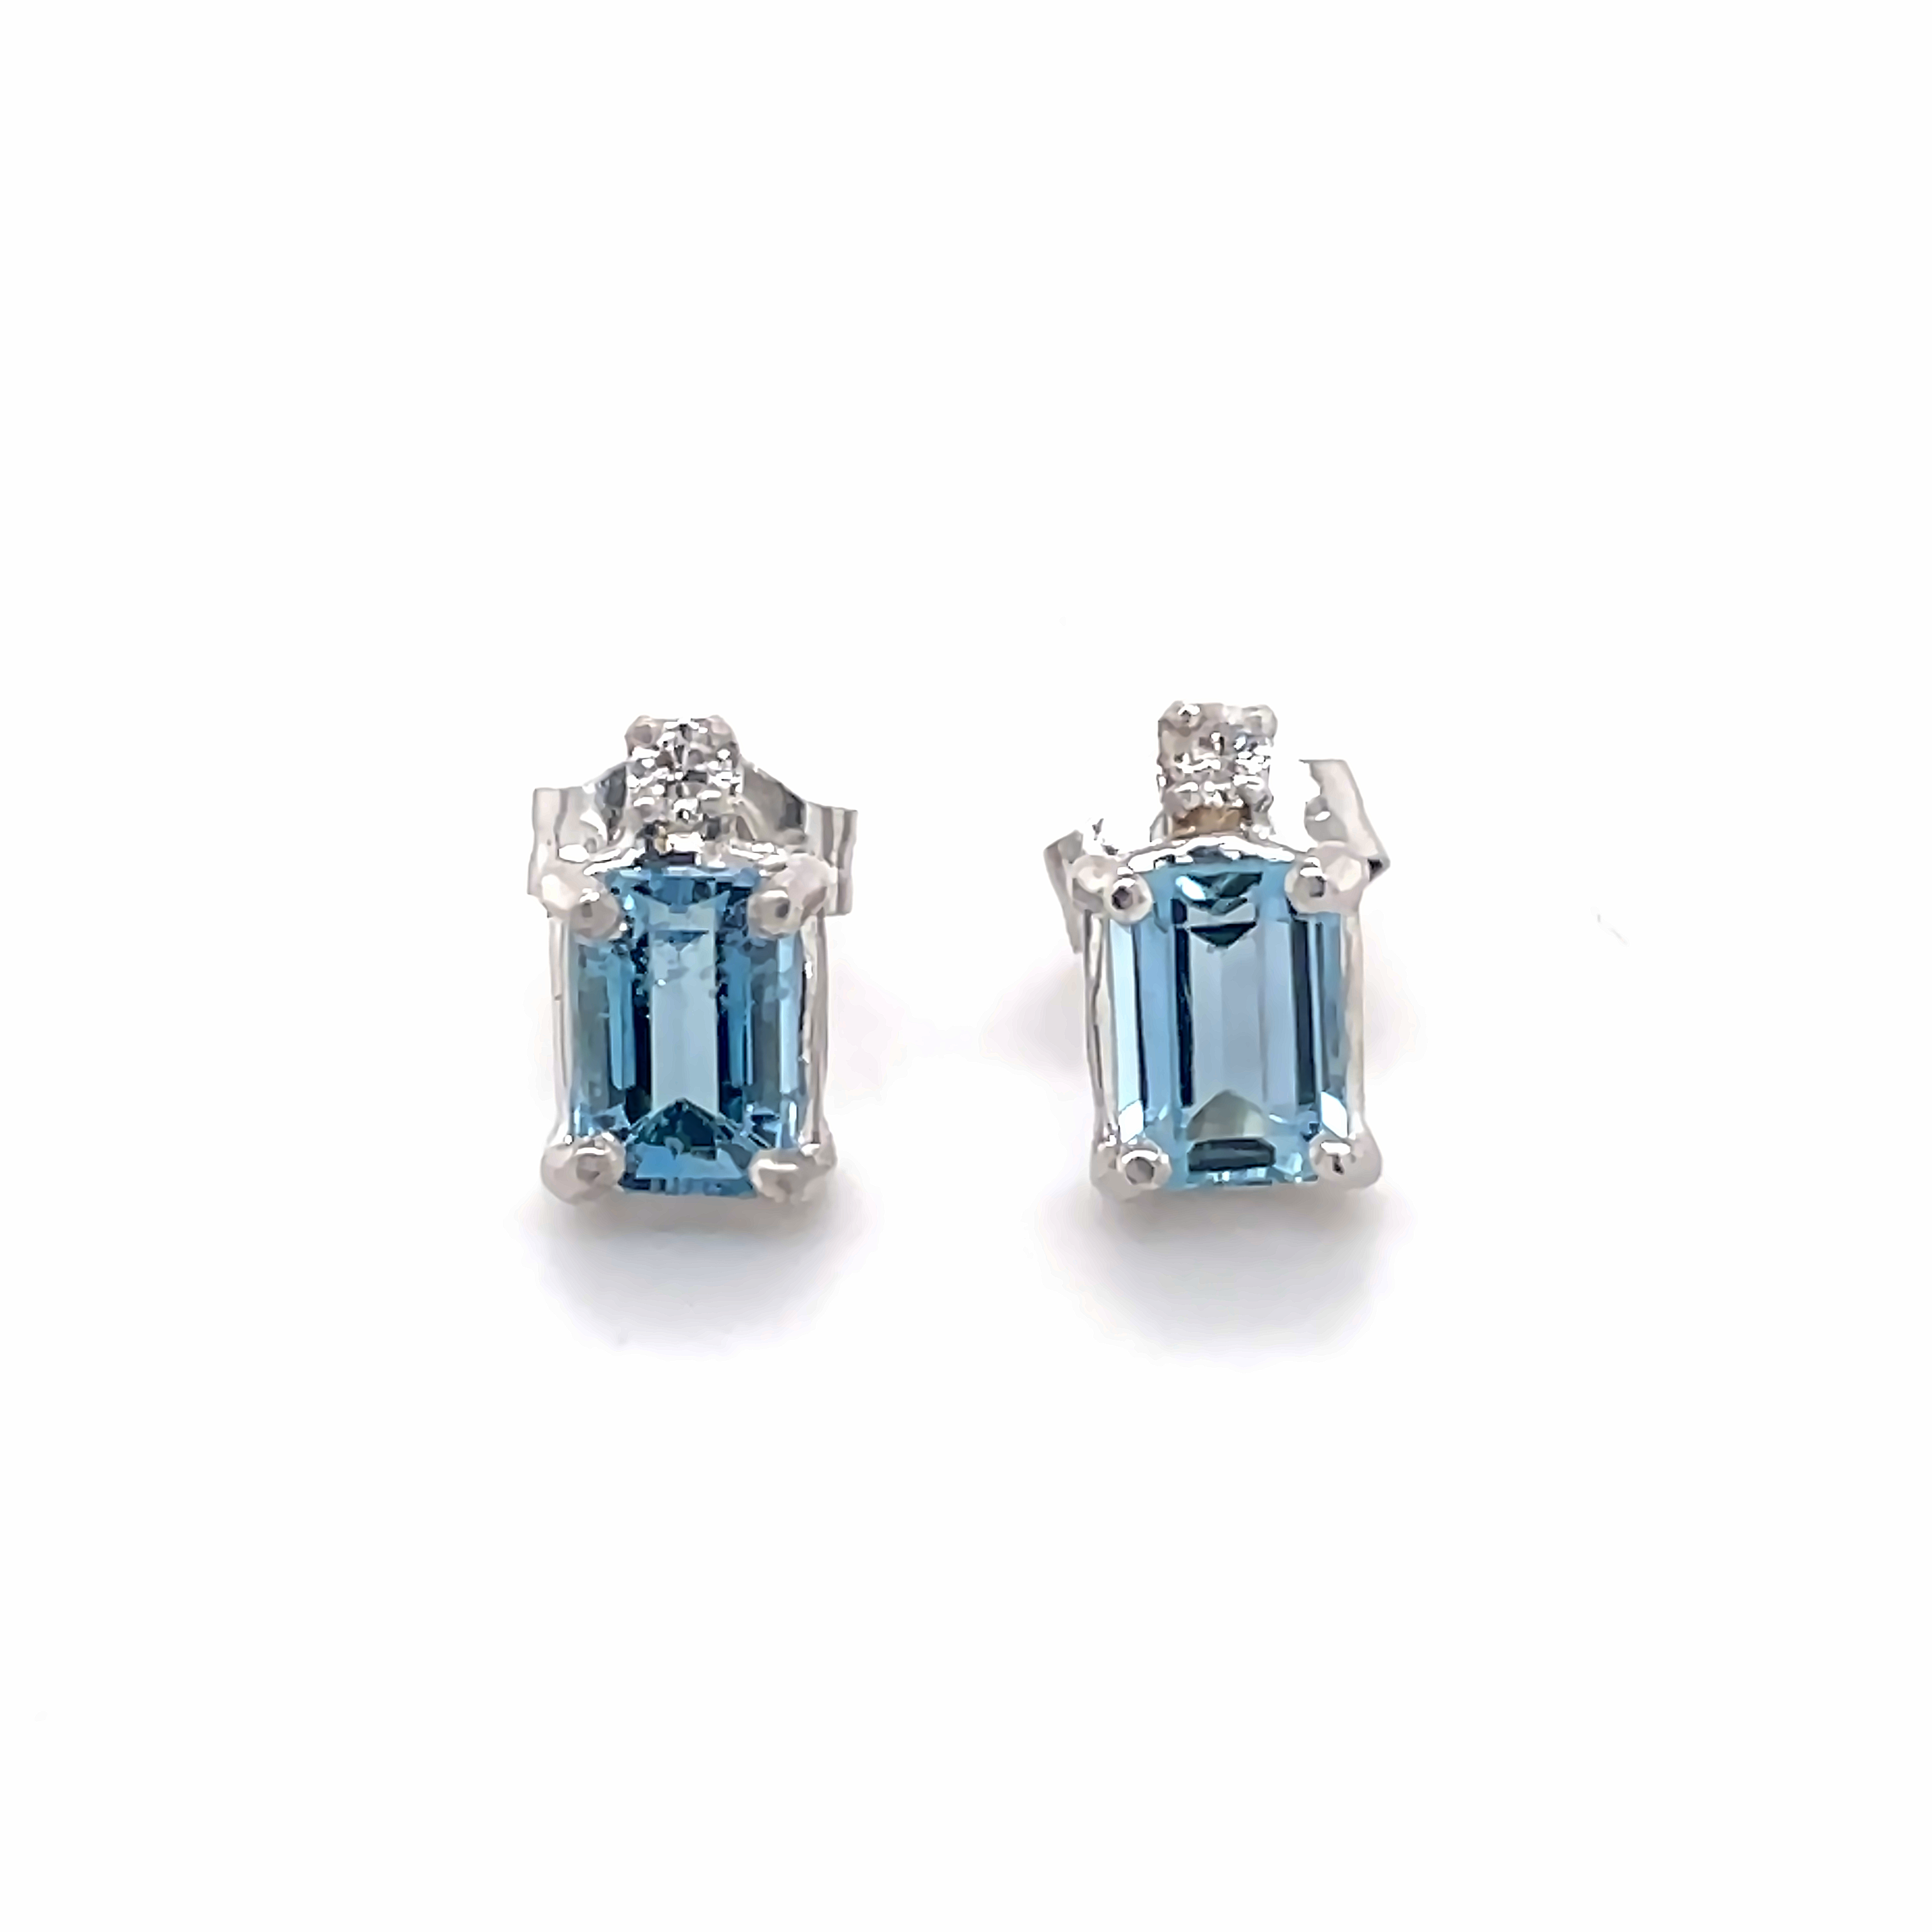 These timeless earrings feature two subtle Aquamarine stones and two glittering diamonds nestled in a refined 14k white gold setting with secure friction backs. A stunning testament to classic elegance.